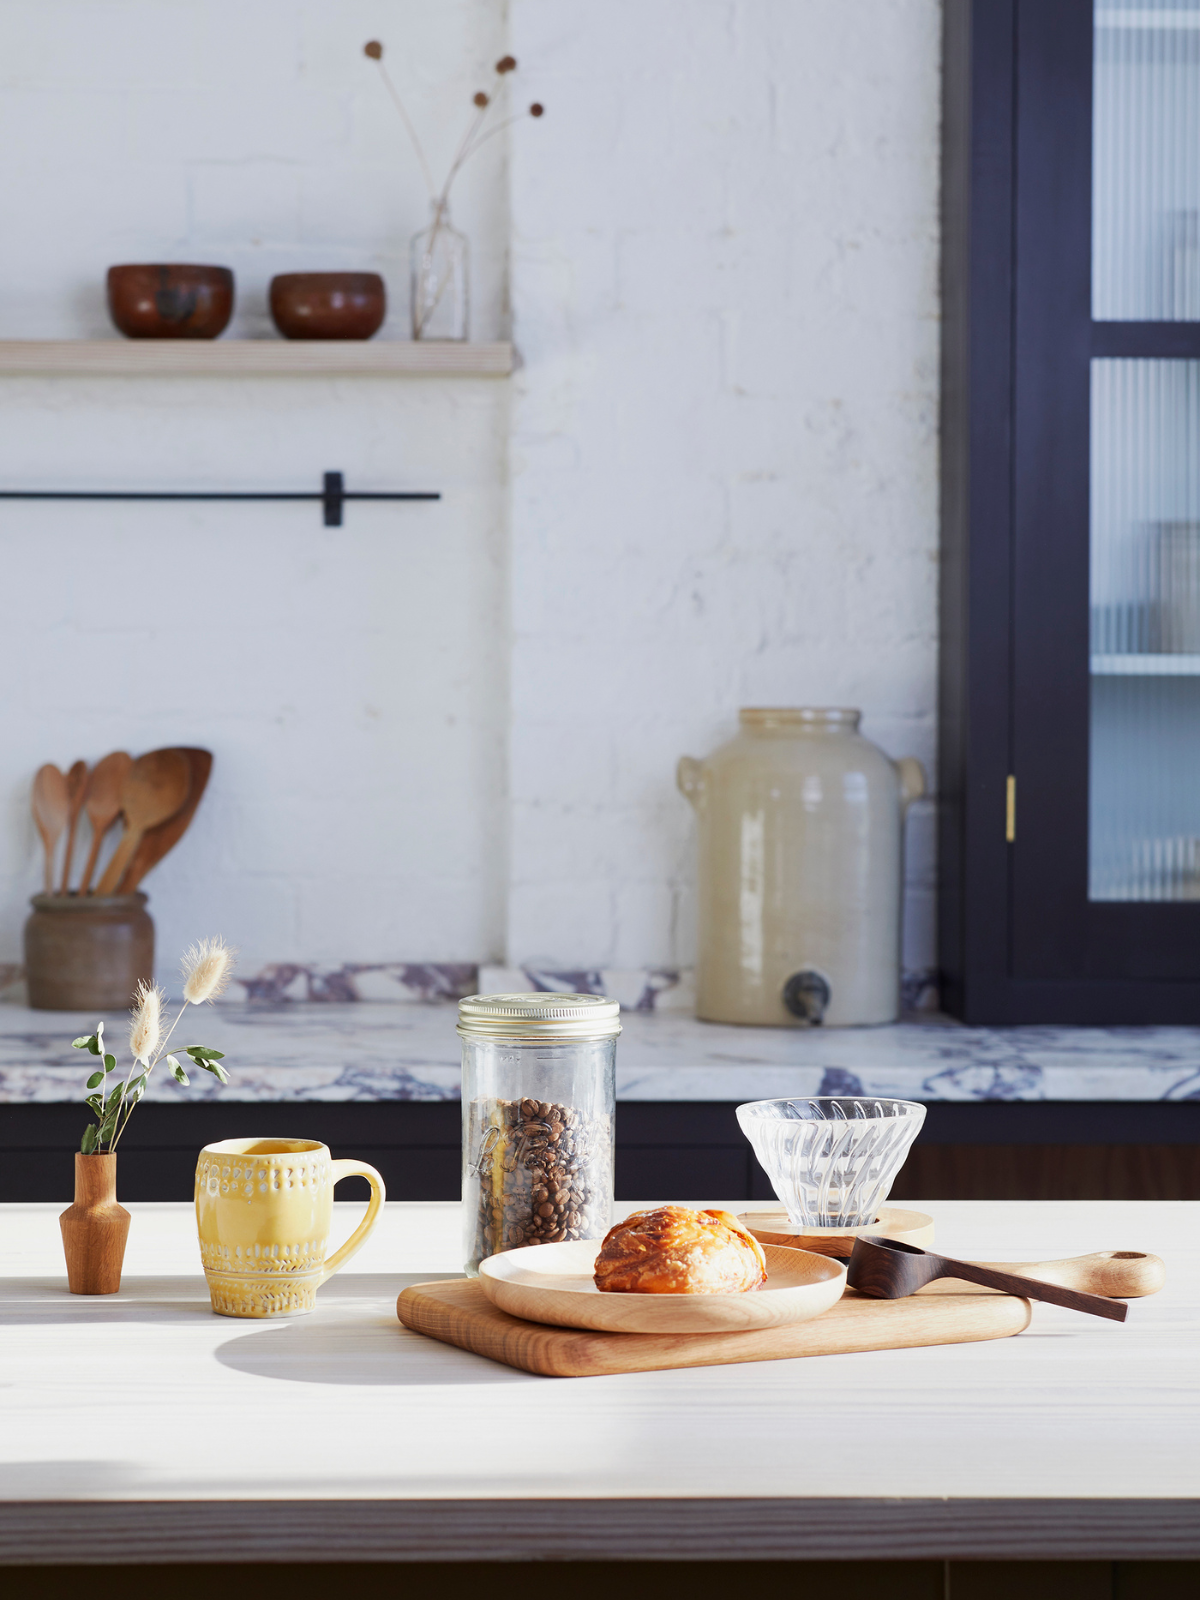 a breakfast table scene with artisan objects